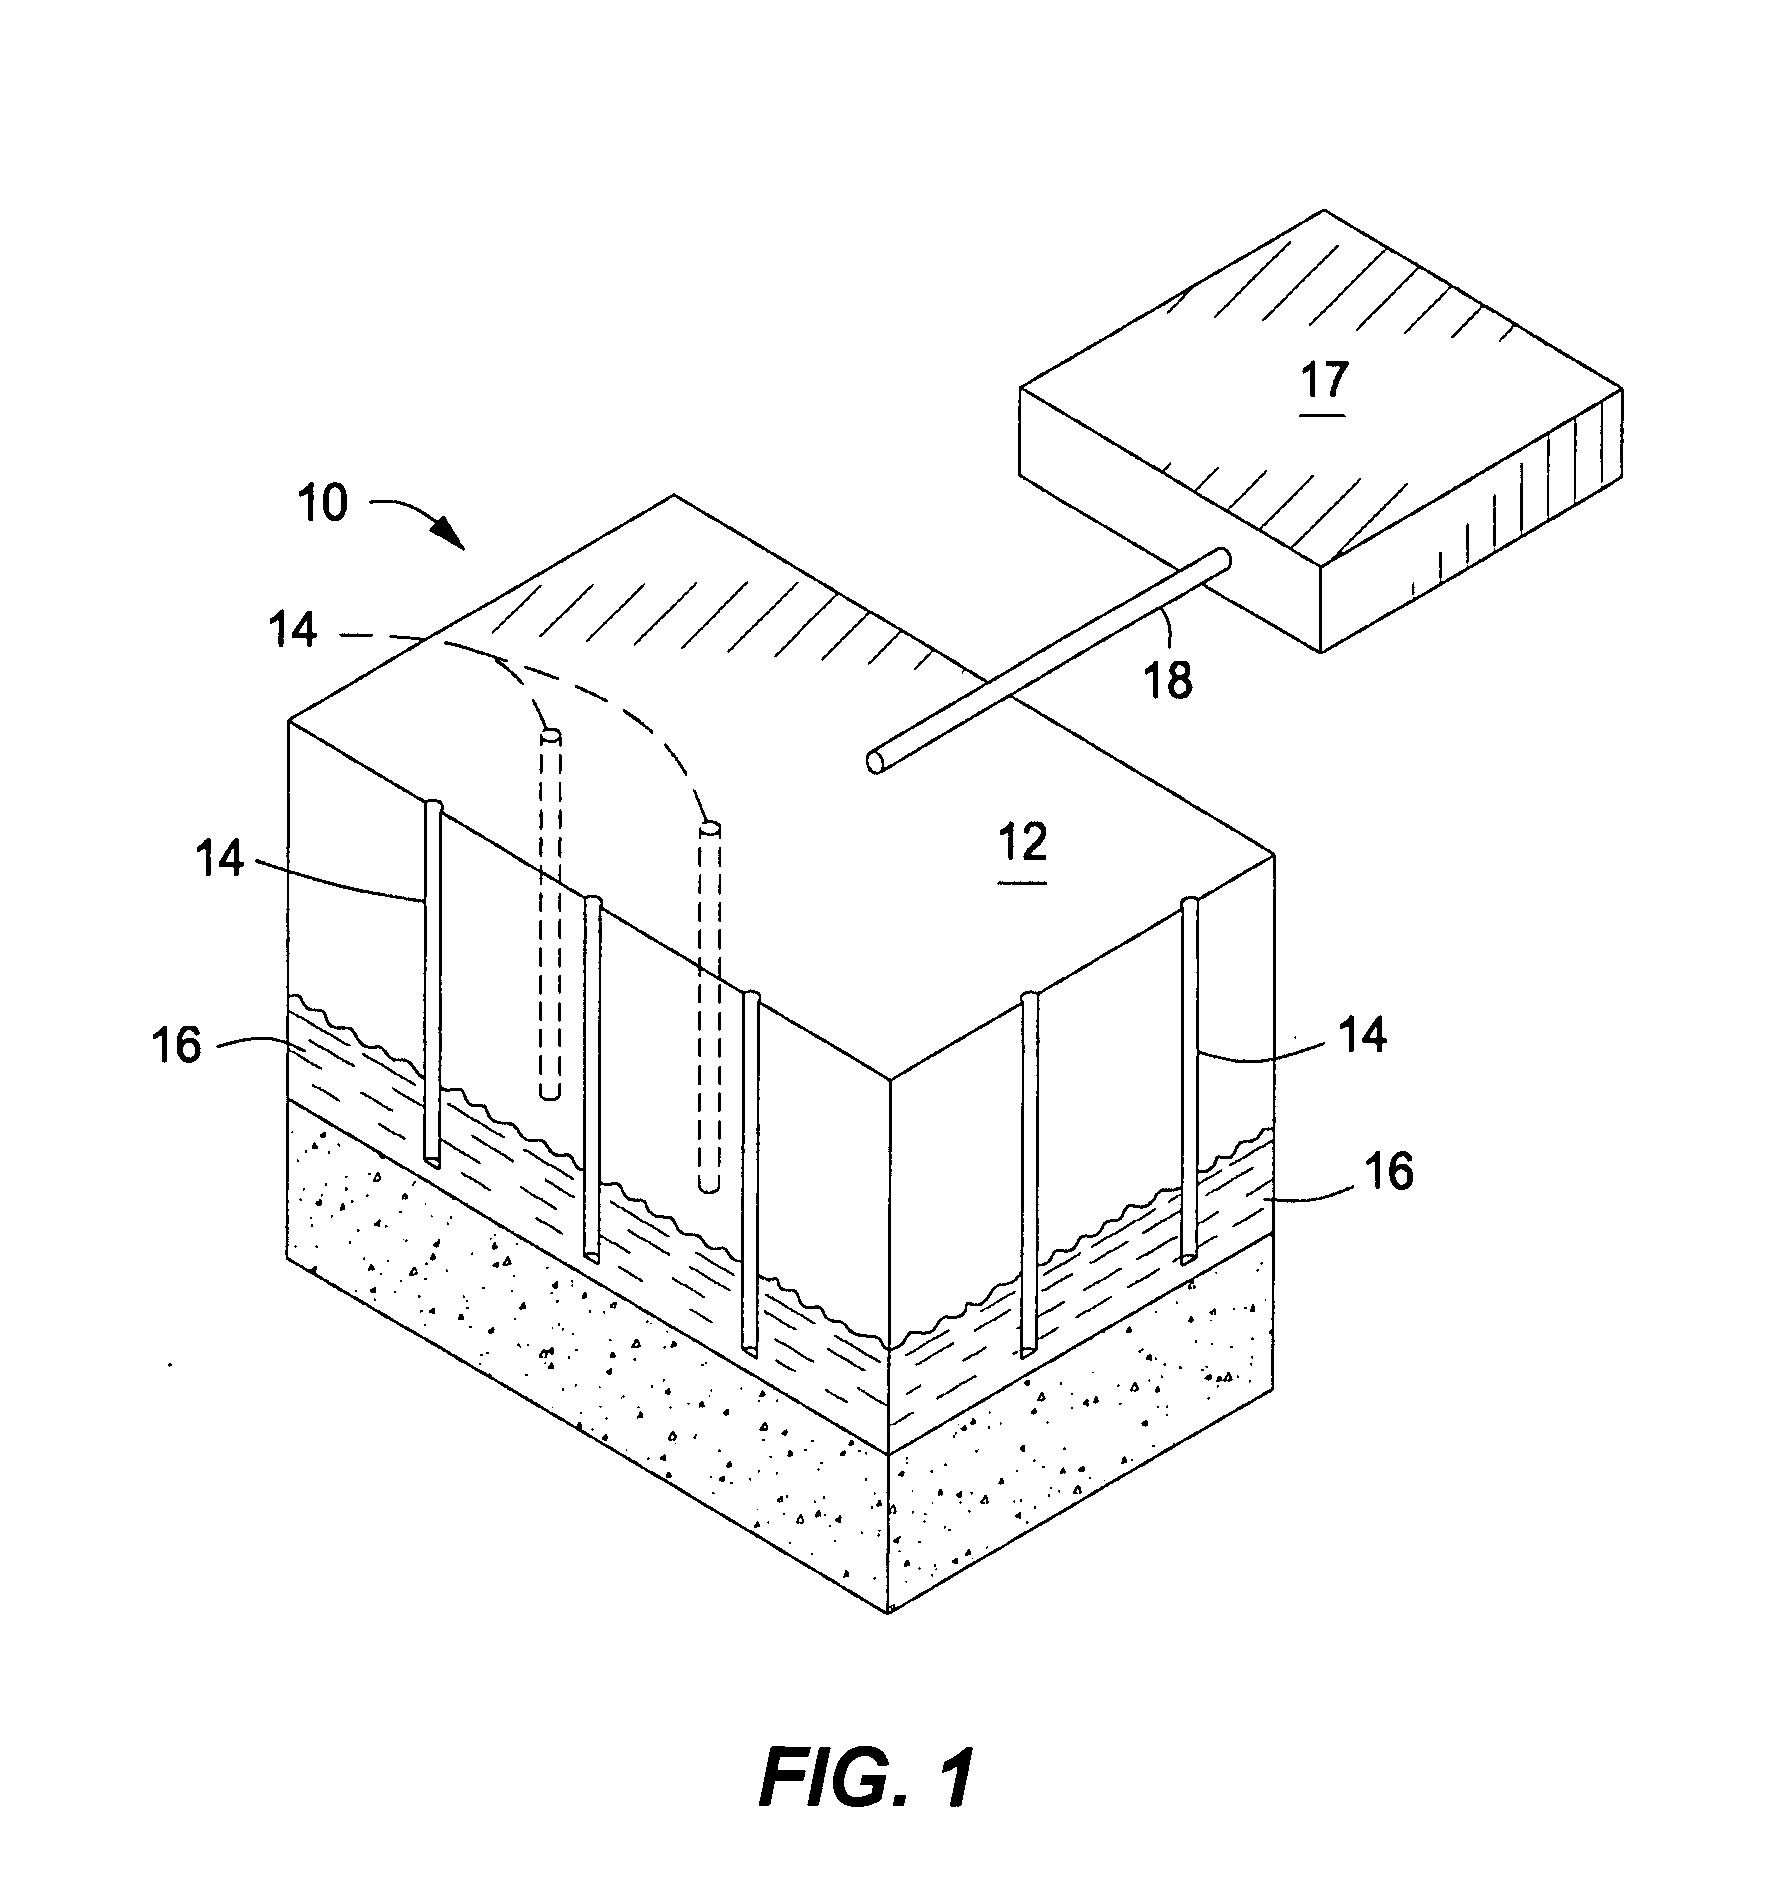 Testing Apparatus For Applying A Stress To A Test Sample